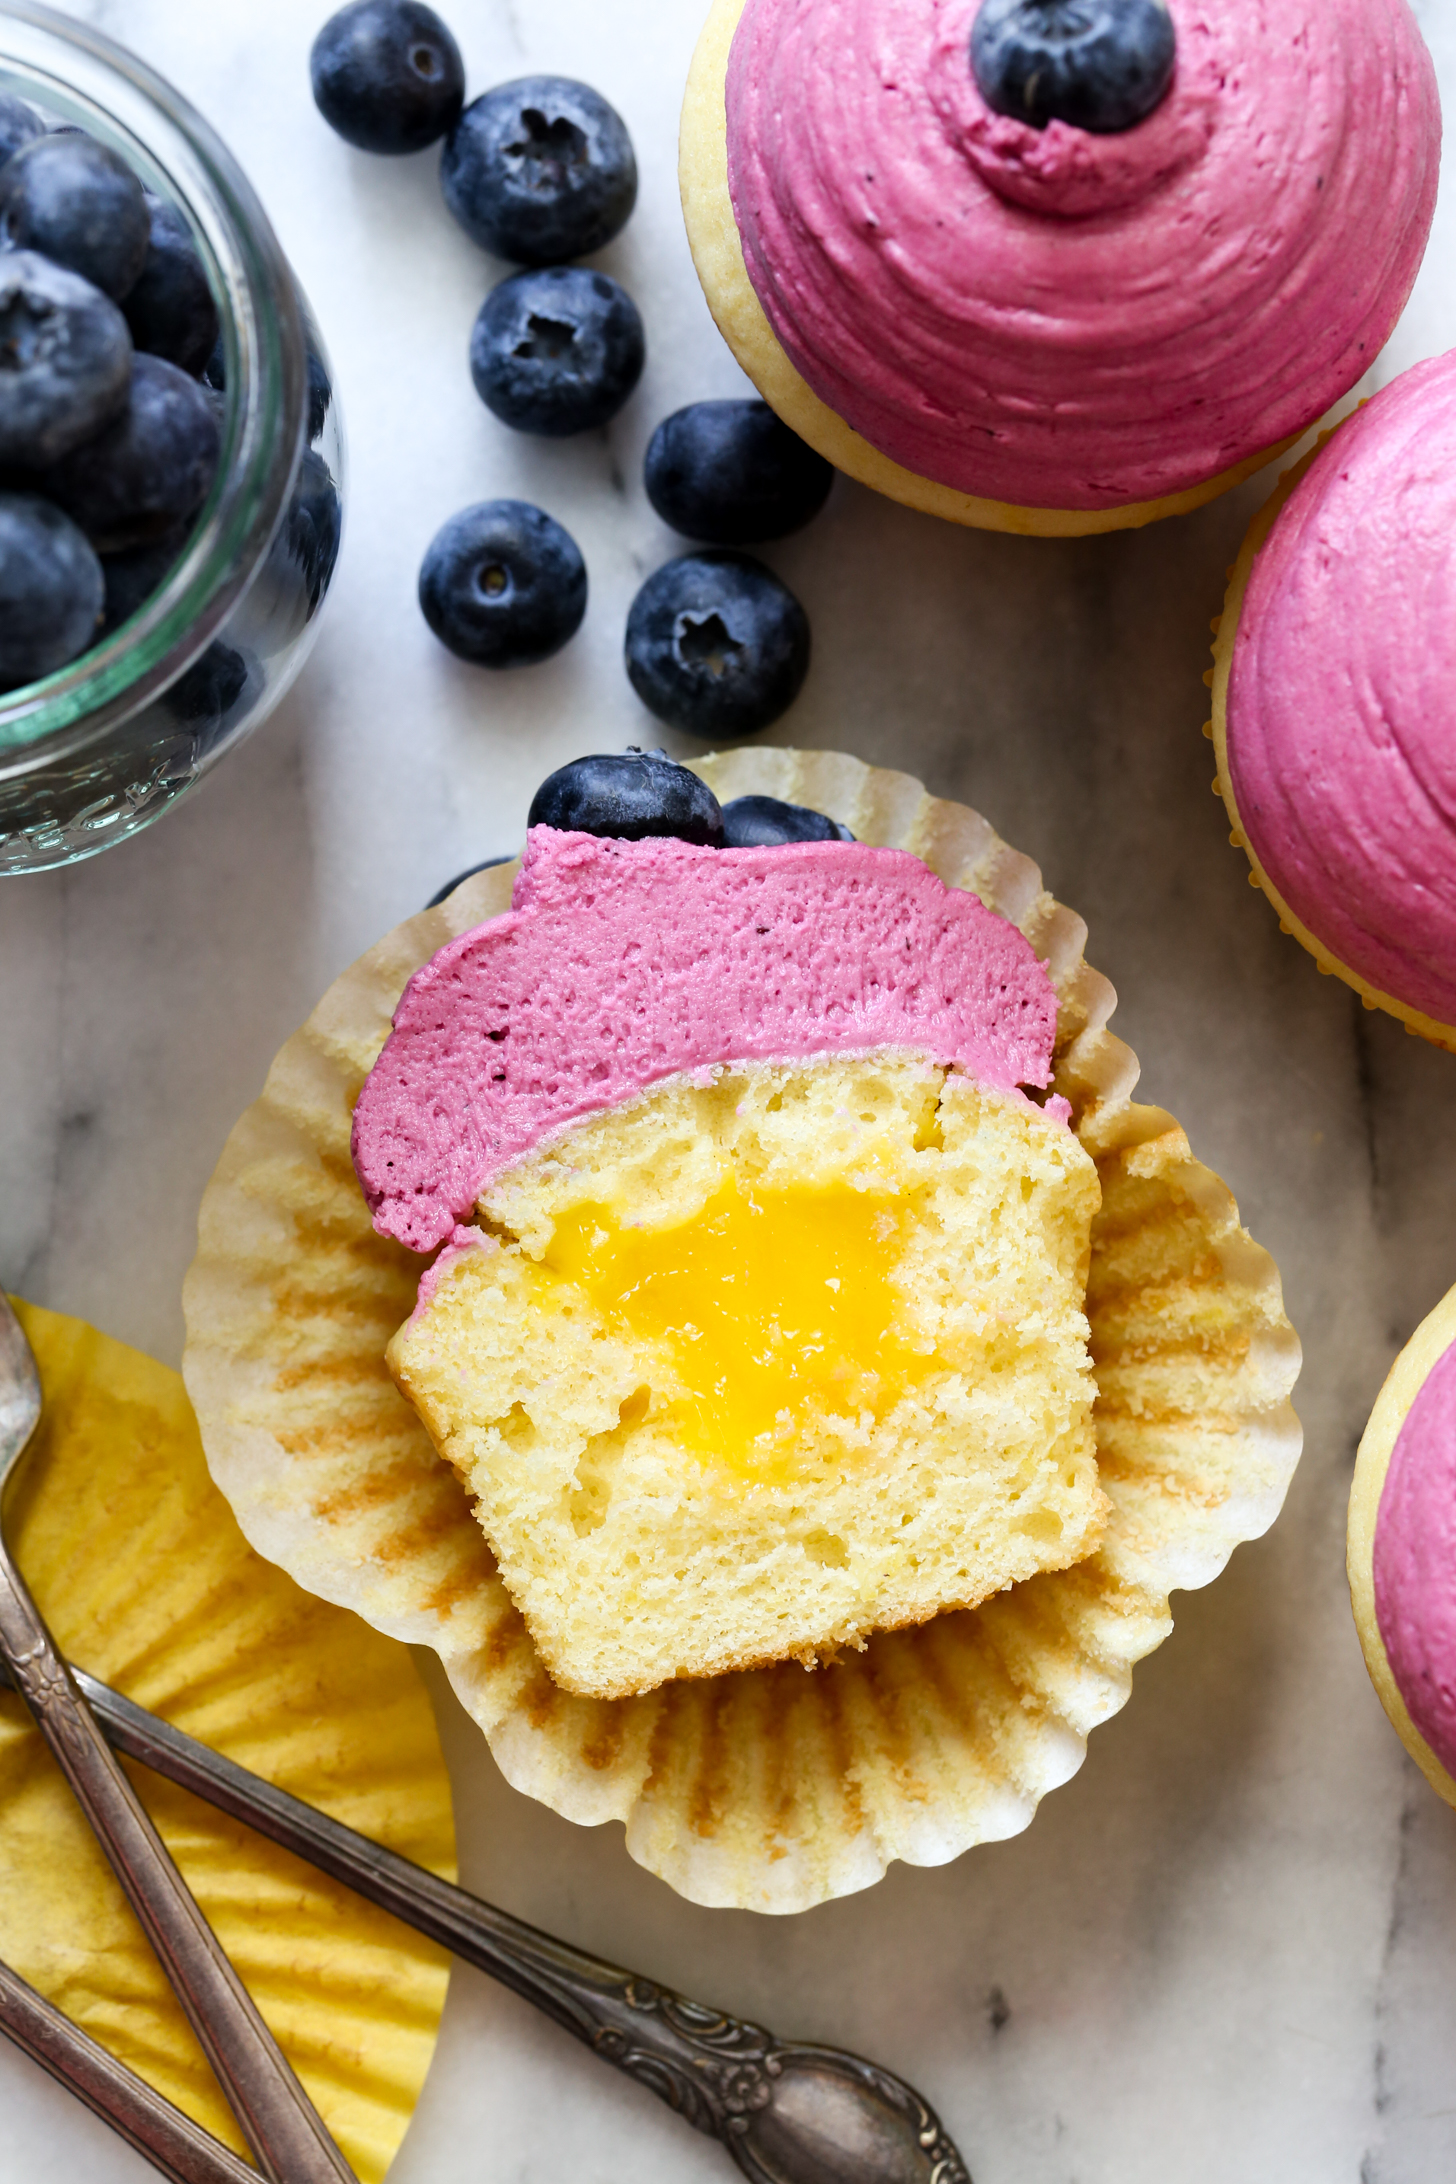 Moist and fluffy homemade lemon cupcakes with fresh lemon curd filling and blueberry buttercream frosting recipe from @bakedbyrachel A fun treat for any spring or summer occasion!